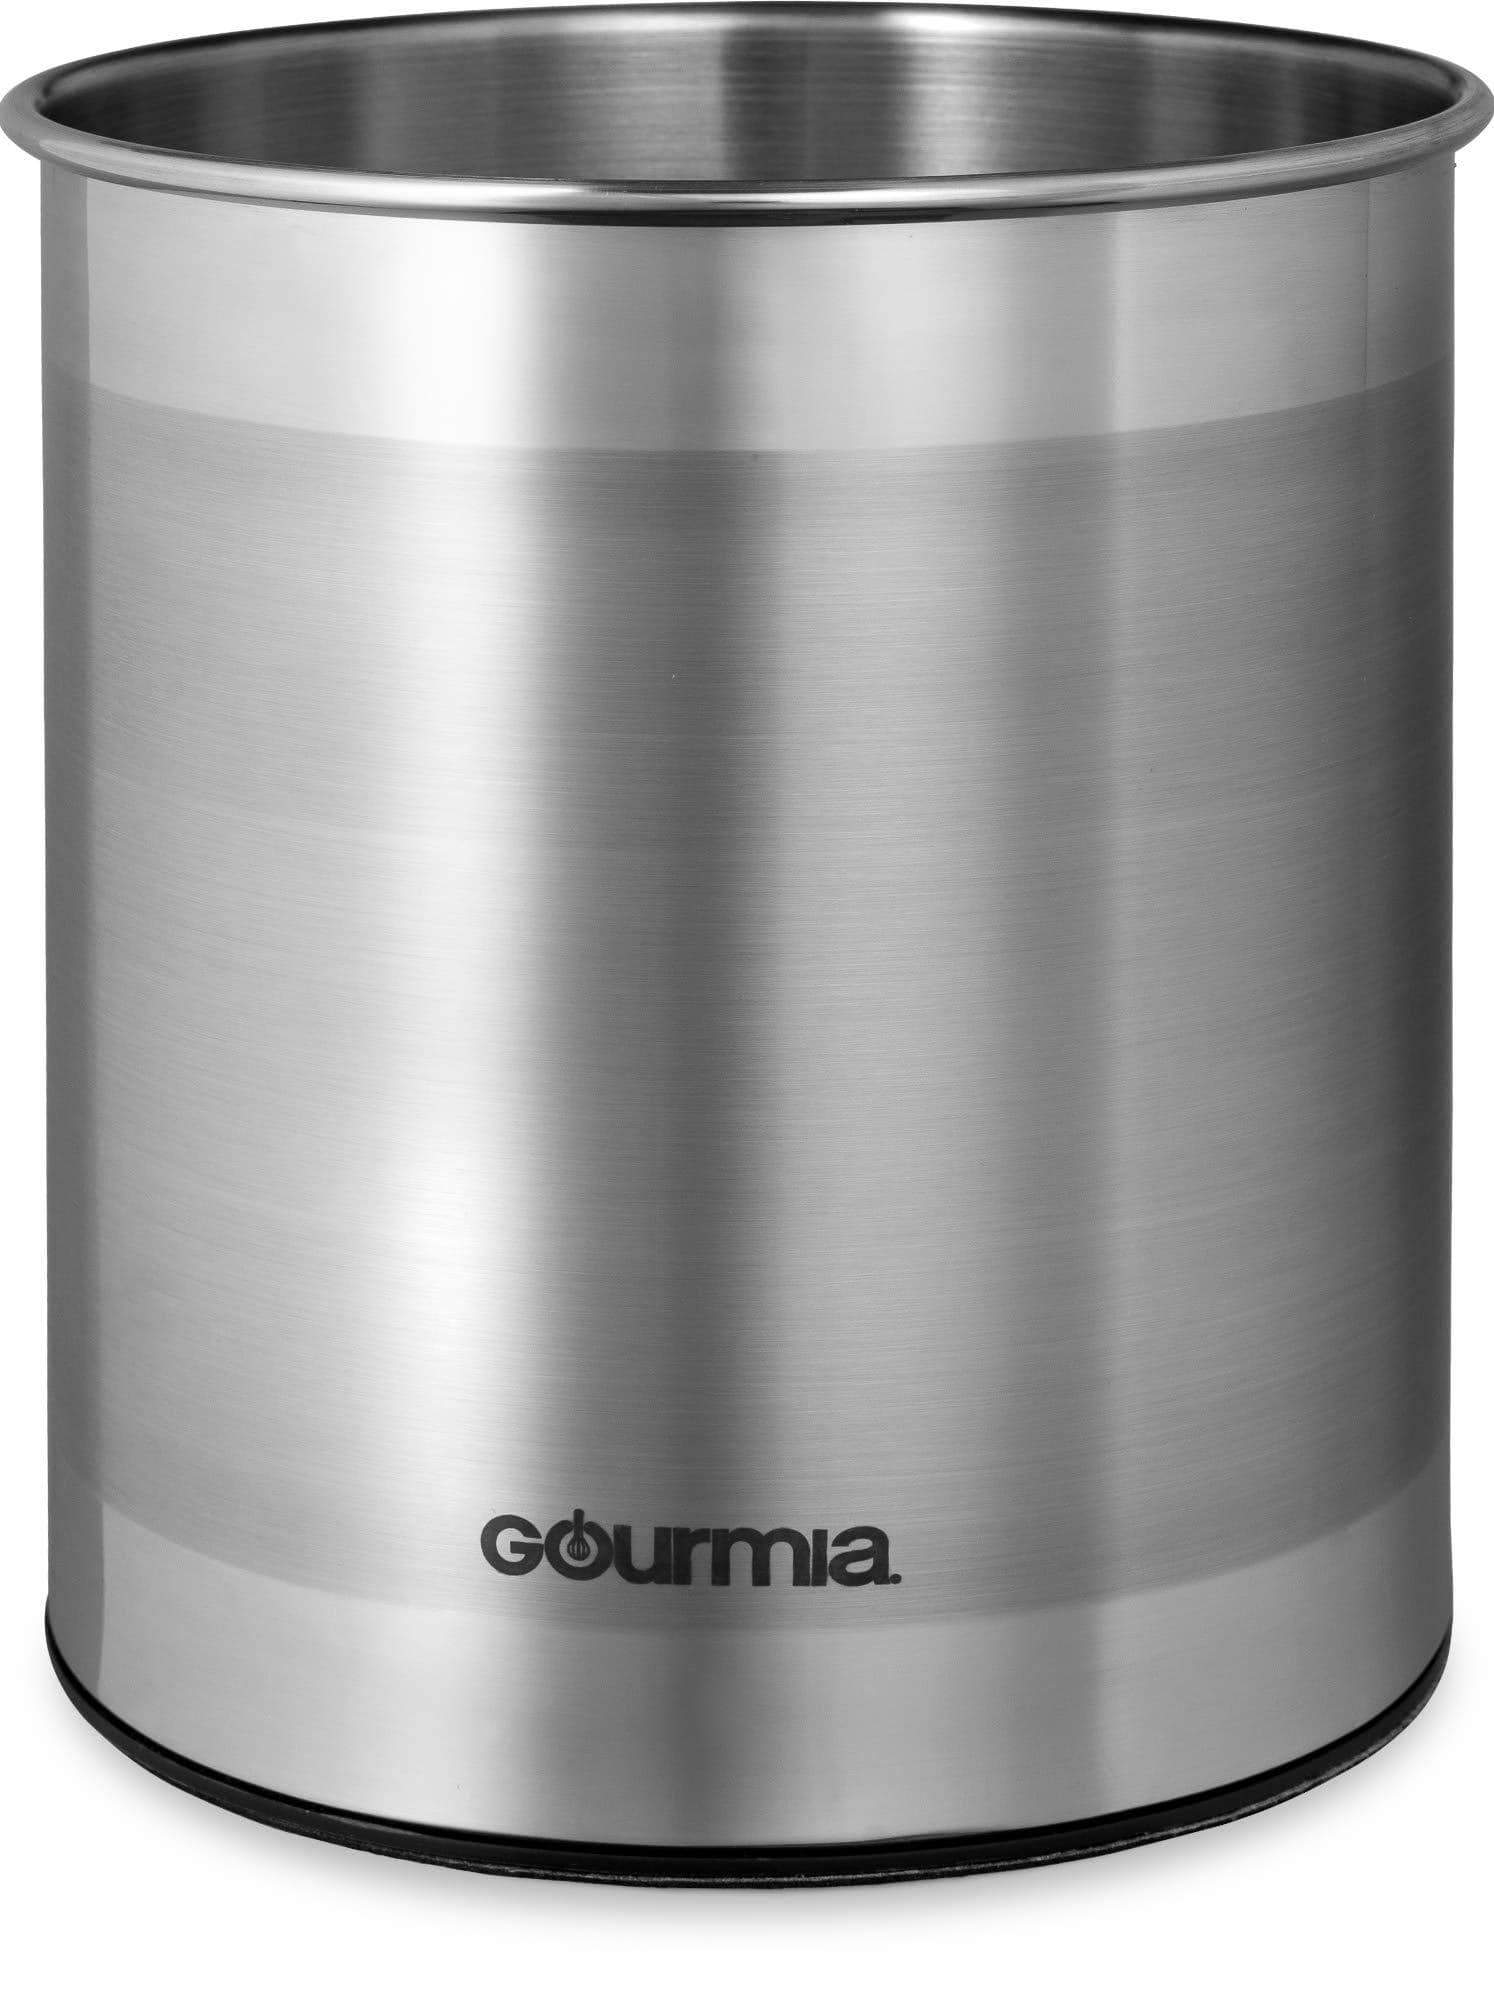 Budget gourmia gch9345 rotating kitchen utensil holder spinning stainless steel organizer to store cooking and serving tools dishwasher safe non slip bottom use as caddy